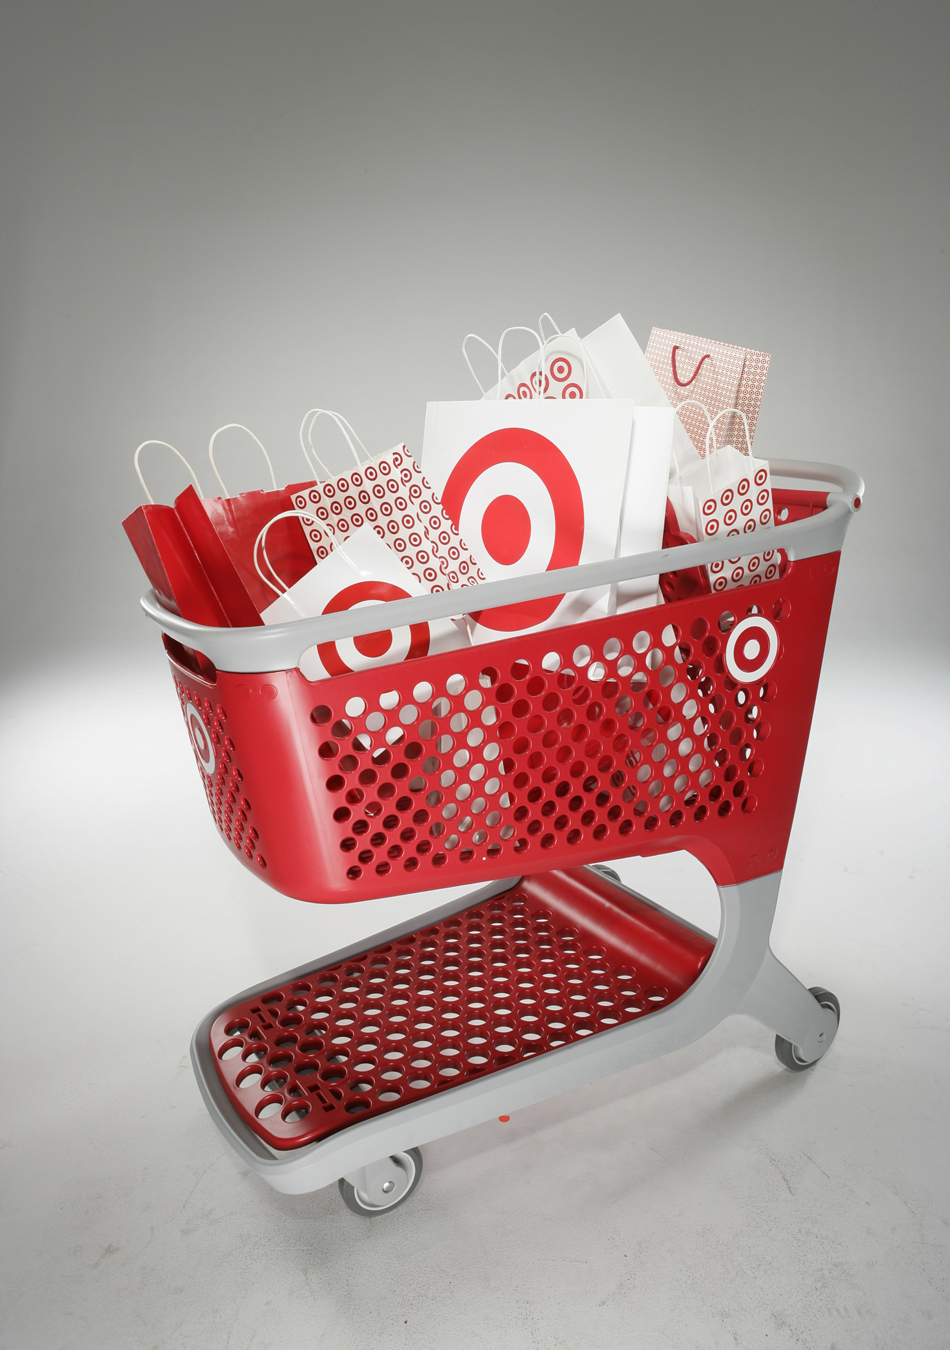 ... news and data - Business - Boston firm redesigns the shopping cart